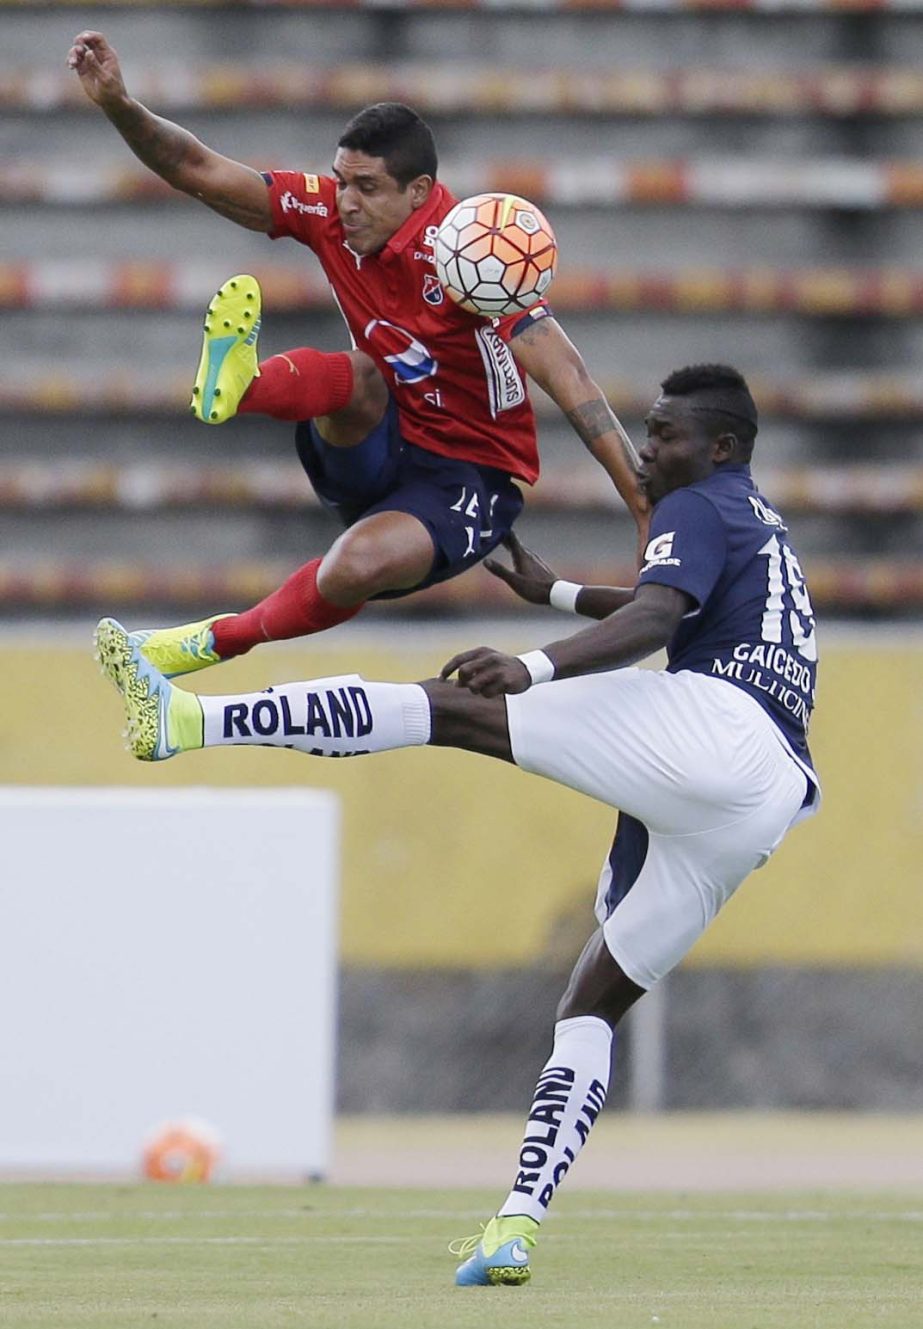 Luis Arias of Colombia's Independiente Medellin (left) fights for the ball with Jordy Caicedo of Ecuador's Universidad Catolica during Copa Sudamericana match in Quito, Ecuador on Wednesday.